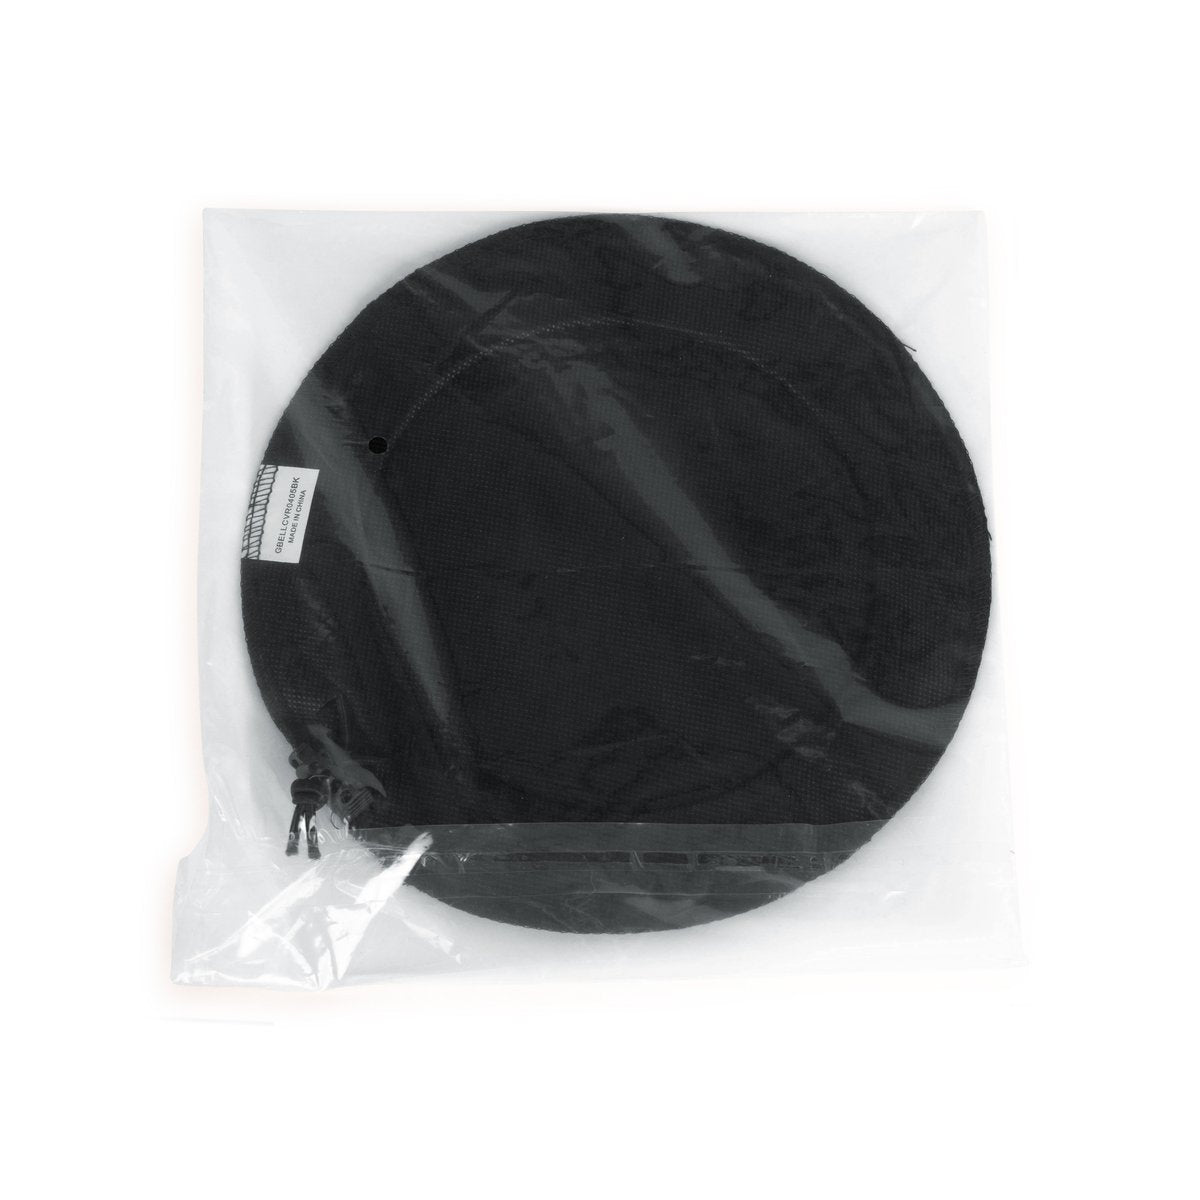 GBELLCVR0203BK - Black Bell Cover With Merv 13 Filter, 2-3 Inches